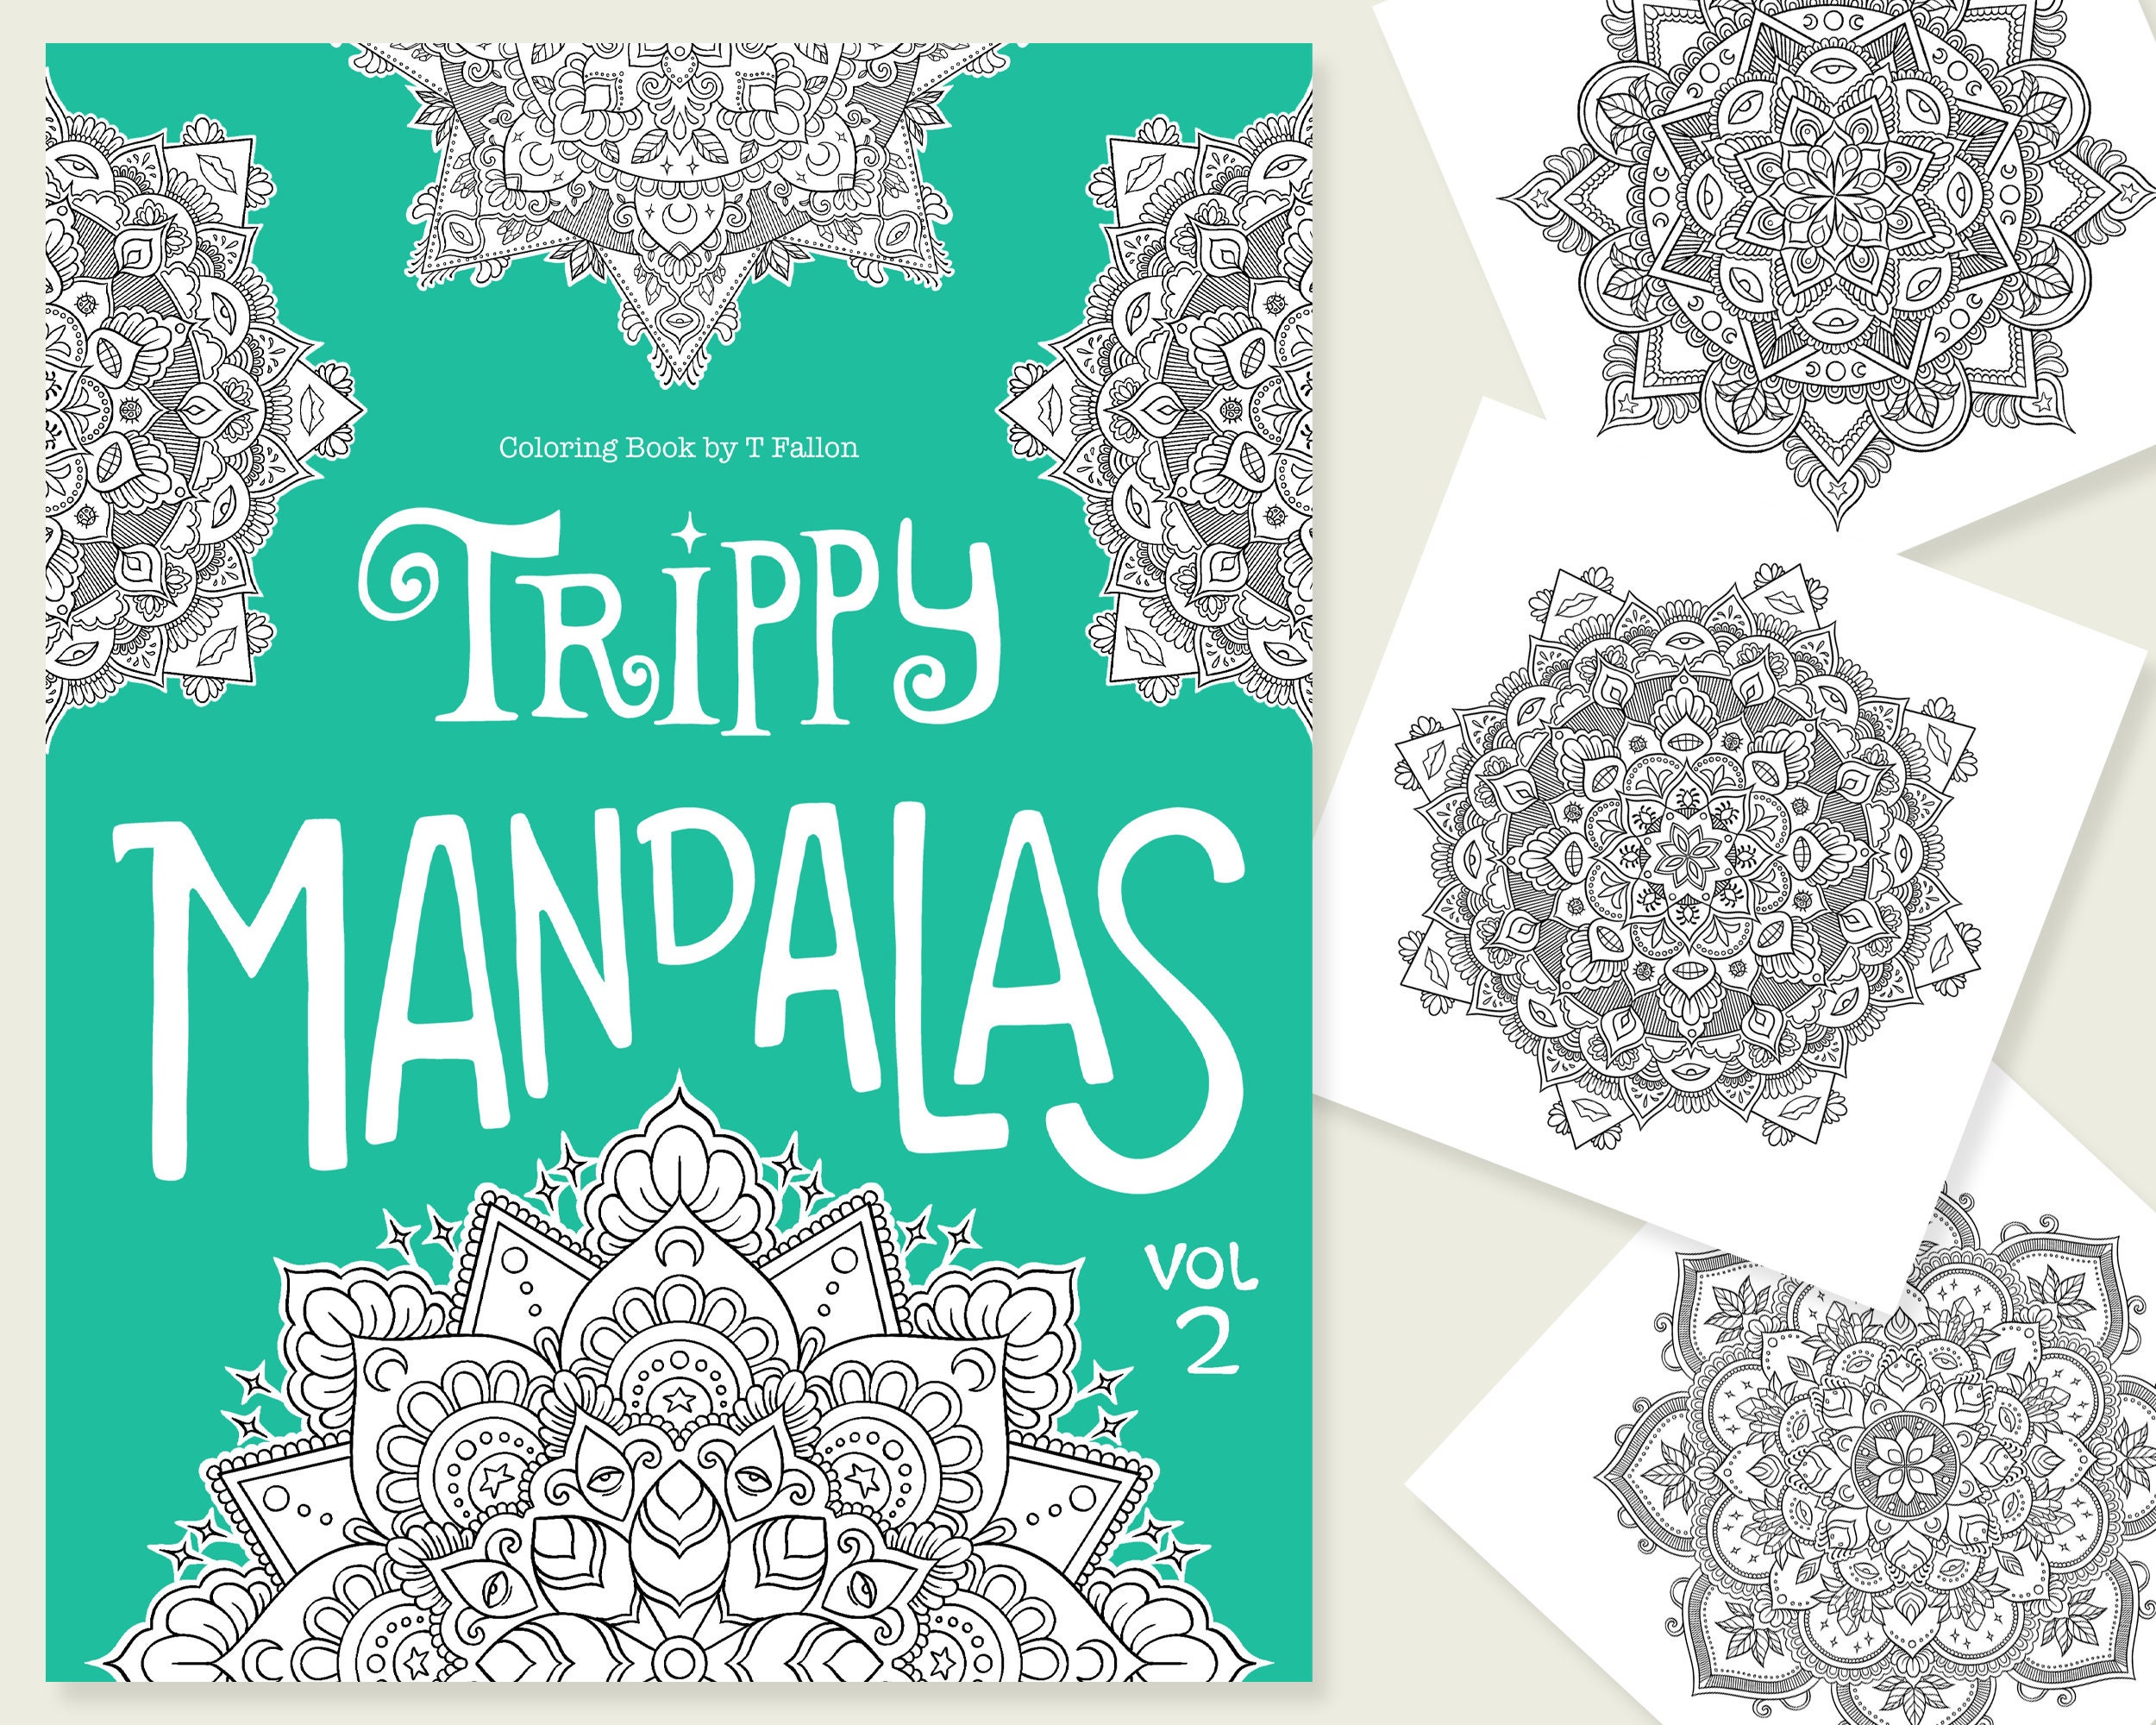 30-page Stoner Coloring Book: Trippy, Adult Relaxation Pages digital Print  